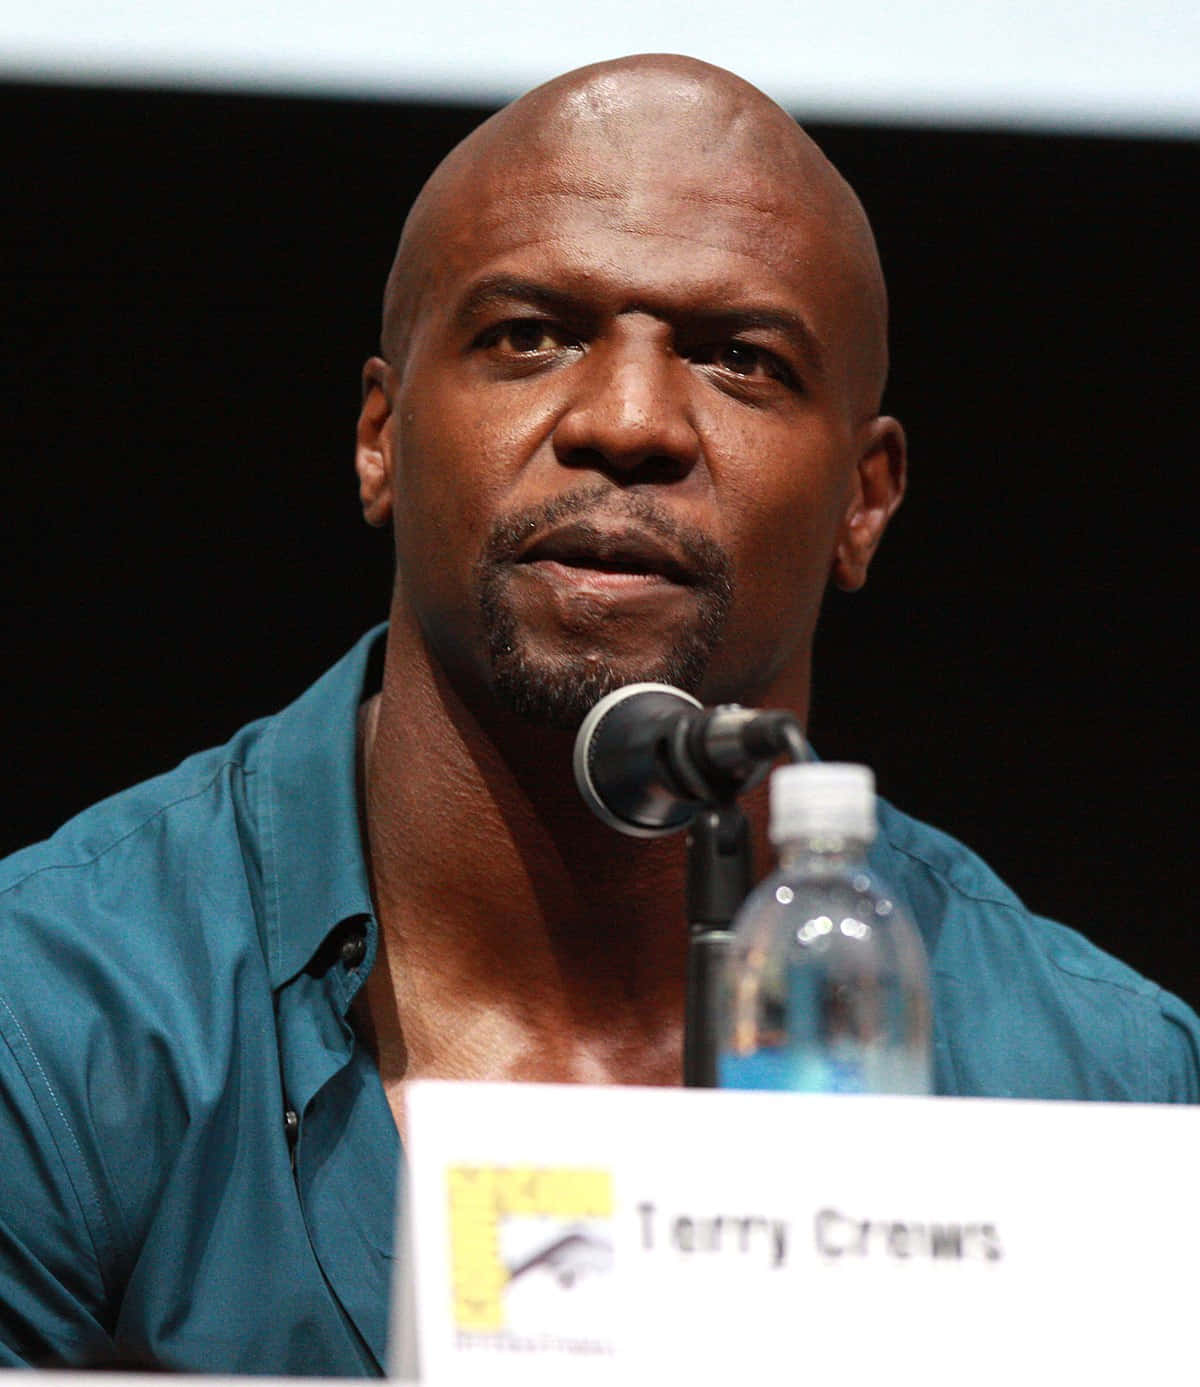 Terry Crews - Actor and former NFL Player Wallpaper